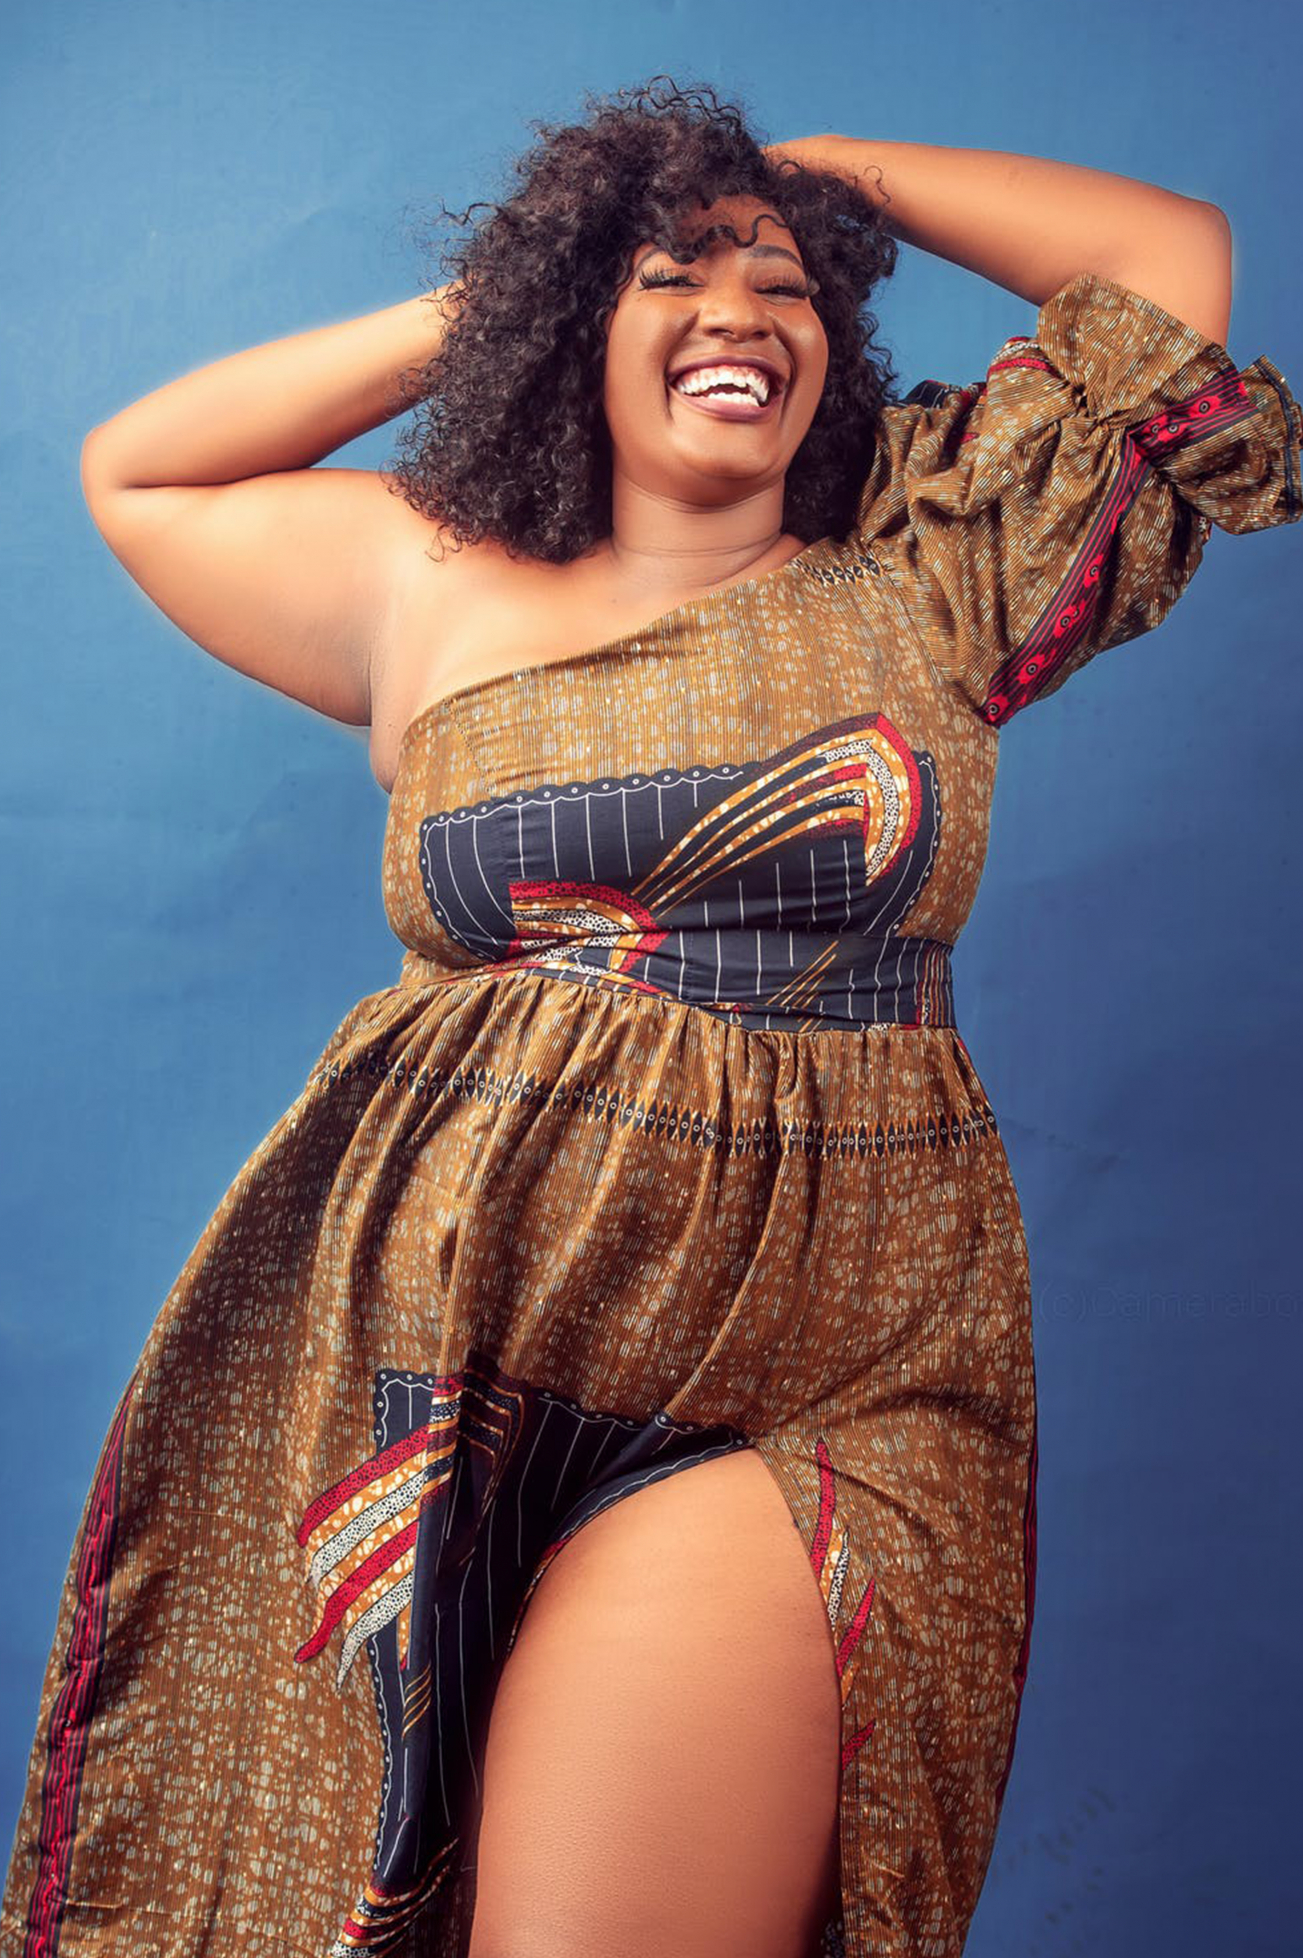 Body positive movement a significant trend for ladieswear in 2018